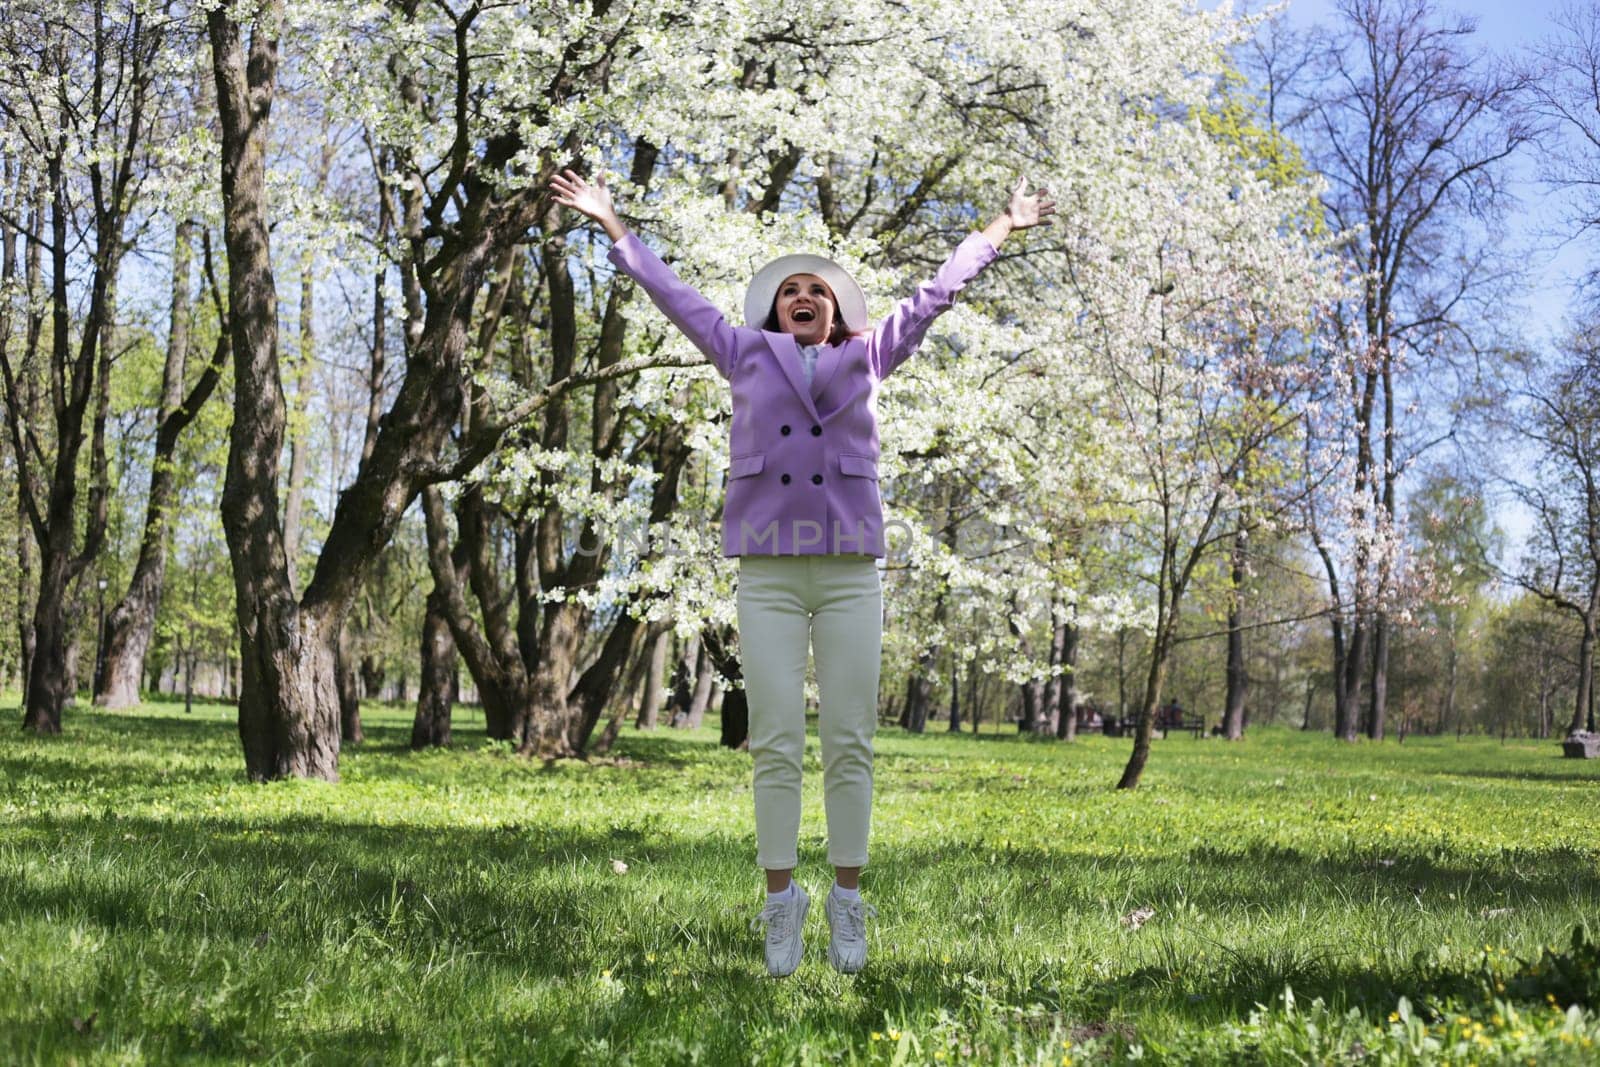 Emotional, joyful bouncing woman in white pants, lilac jacket, and white hat bouncing hard against a blooming tree in a spring park.